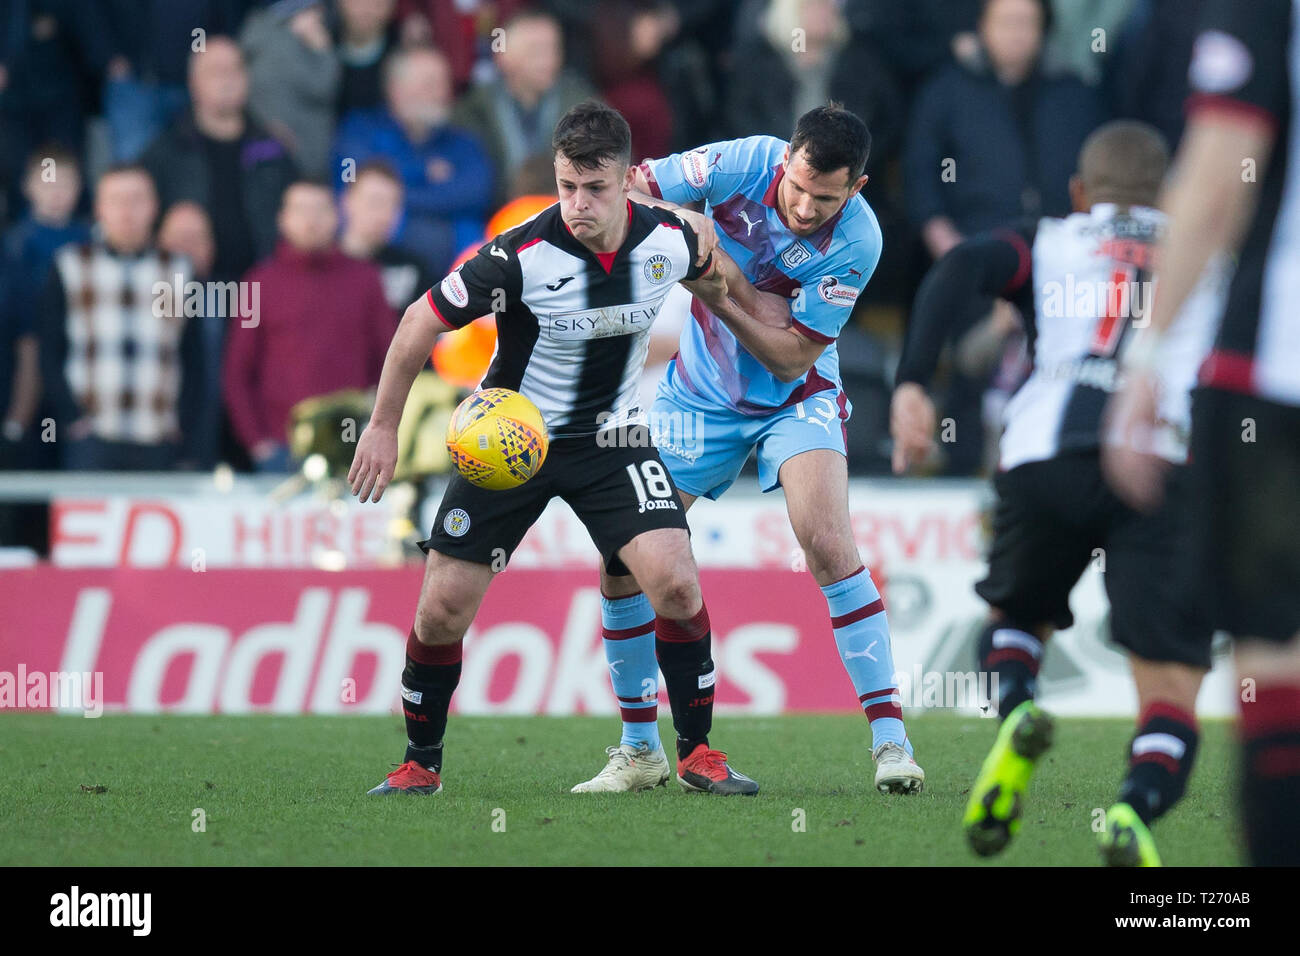 The Simple Digital Arena, Paisley, Scotland, UK. 30th March 2019, Ladbrokes Premiership football, St Mirren versus Dundee; Danny Mullen of St Mirren challenges for the ball with Ryan McGowan of Dundee Stock Photo